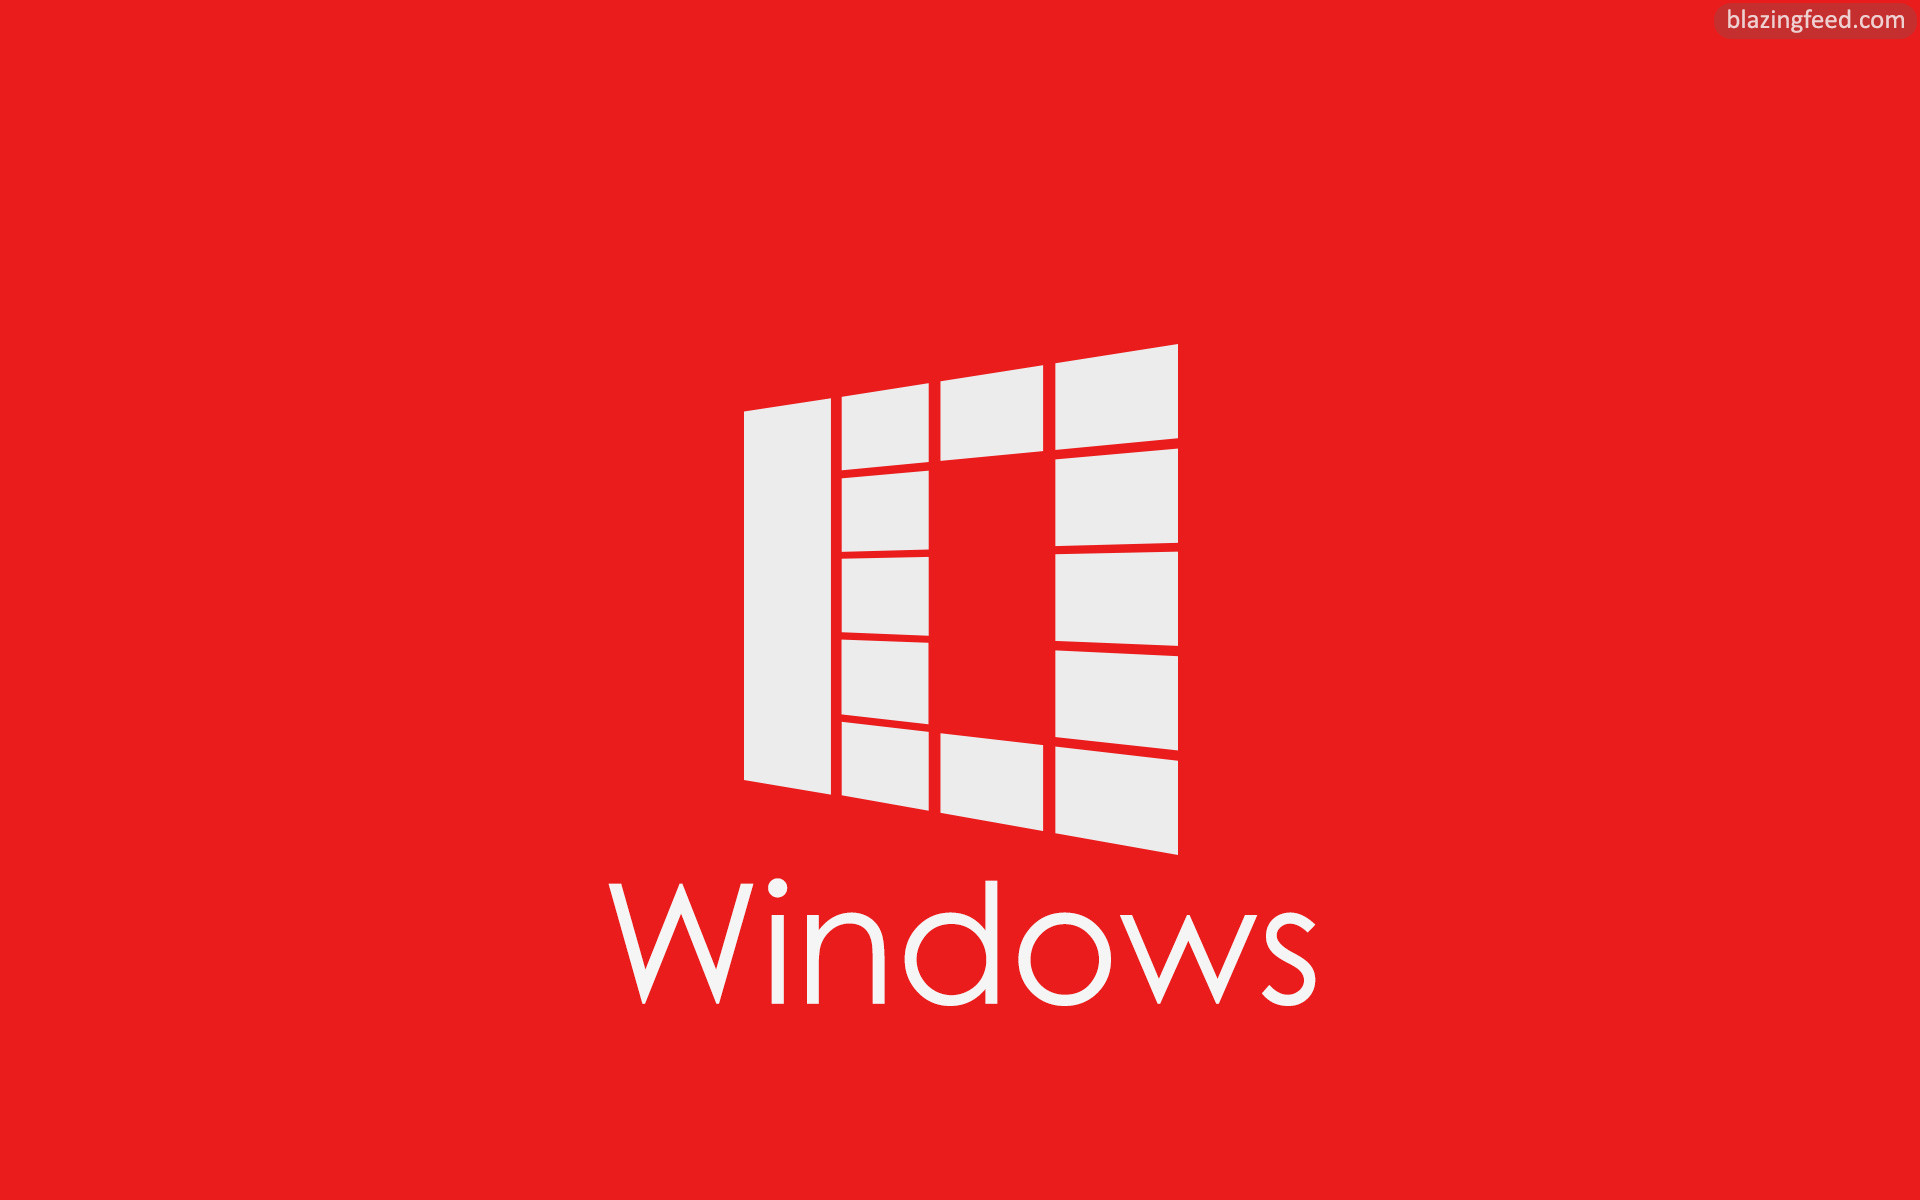 1920x1200 Windows 10 Logo Wallpaper and Theme Pack | All for Windows 10 Free